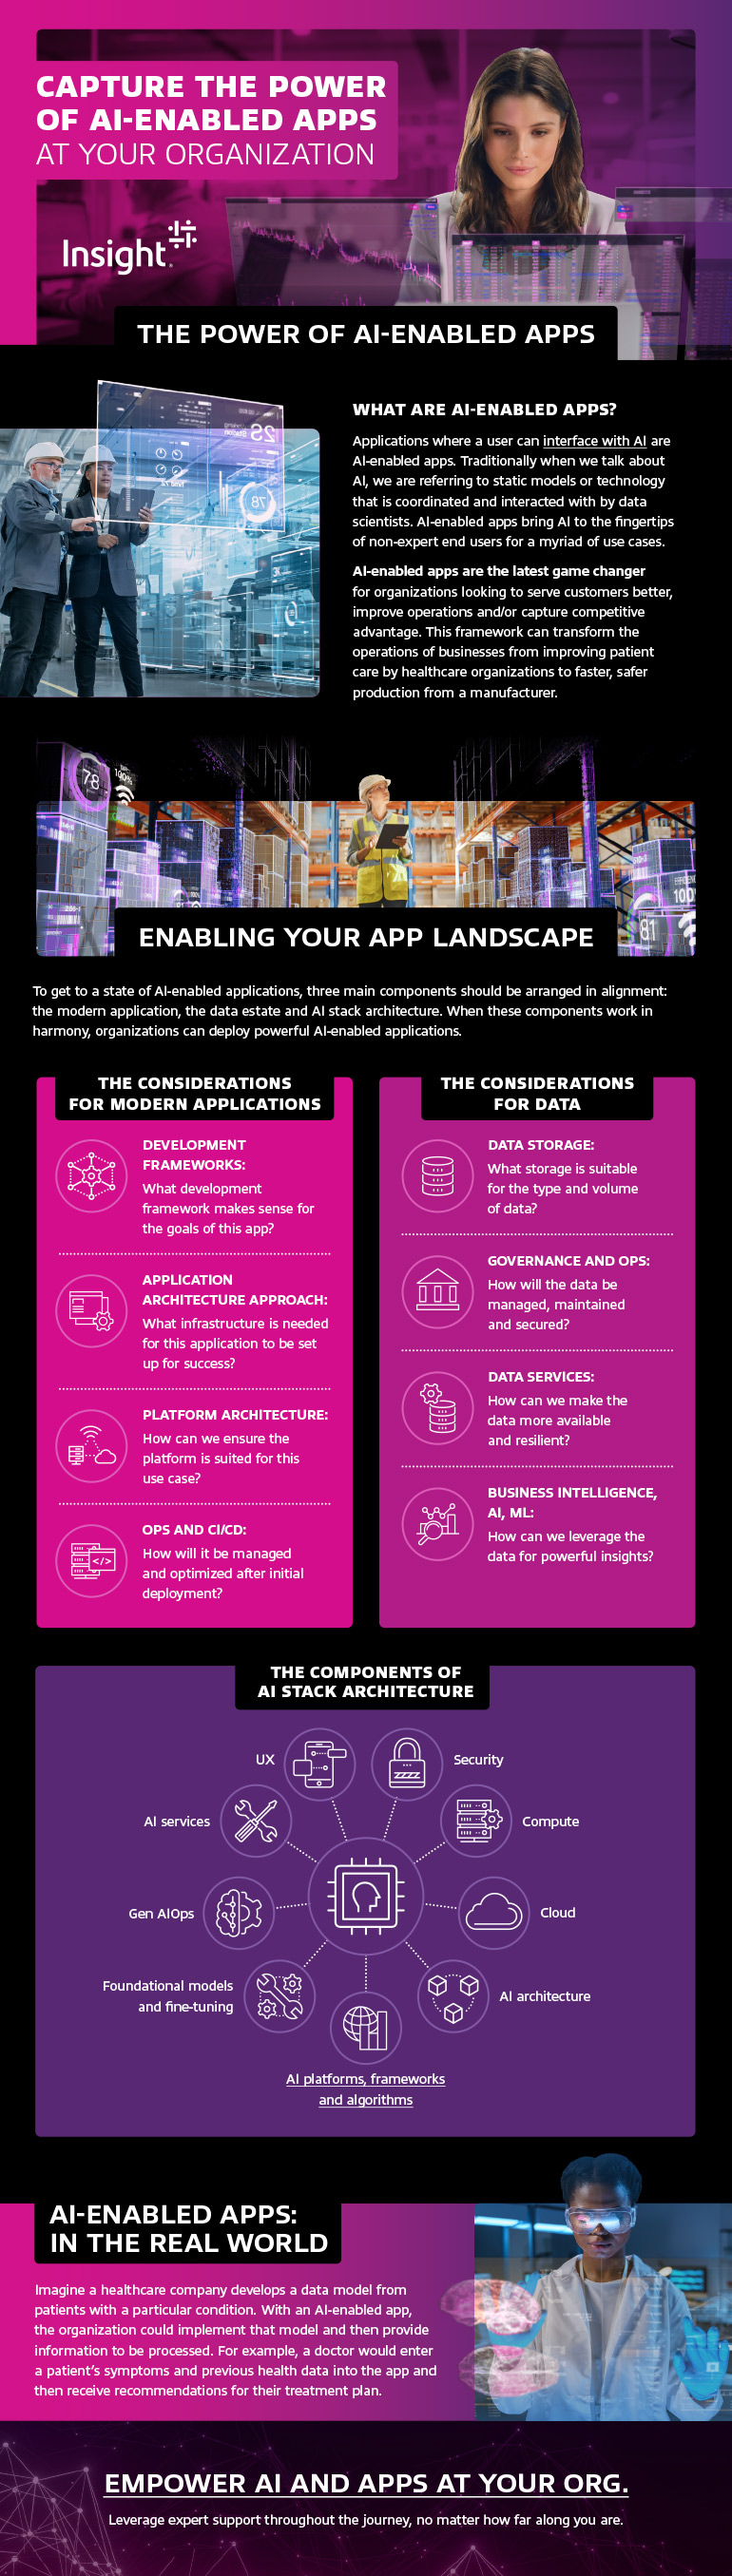 Capture the Power of AI-Enabled Apps at Your Organization infographic